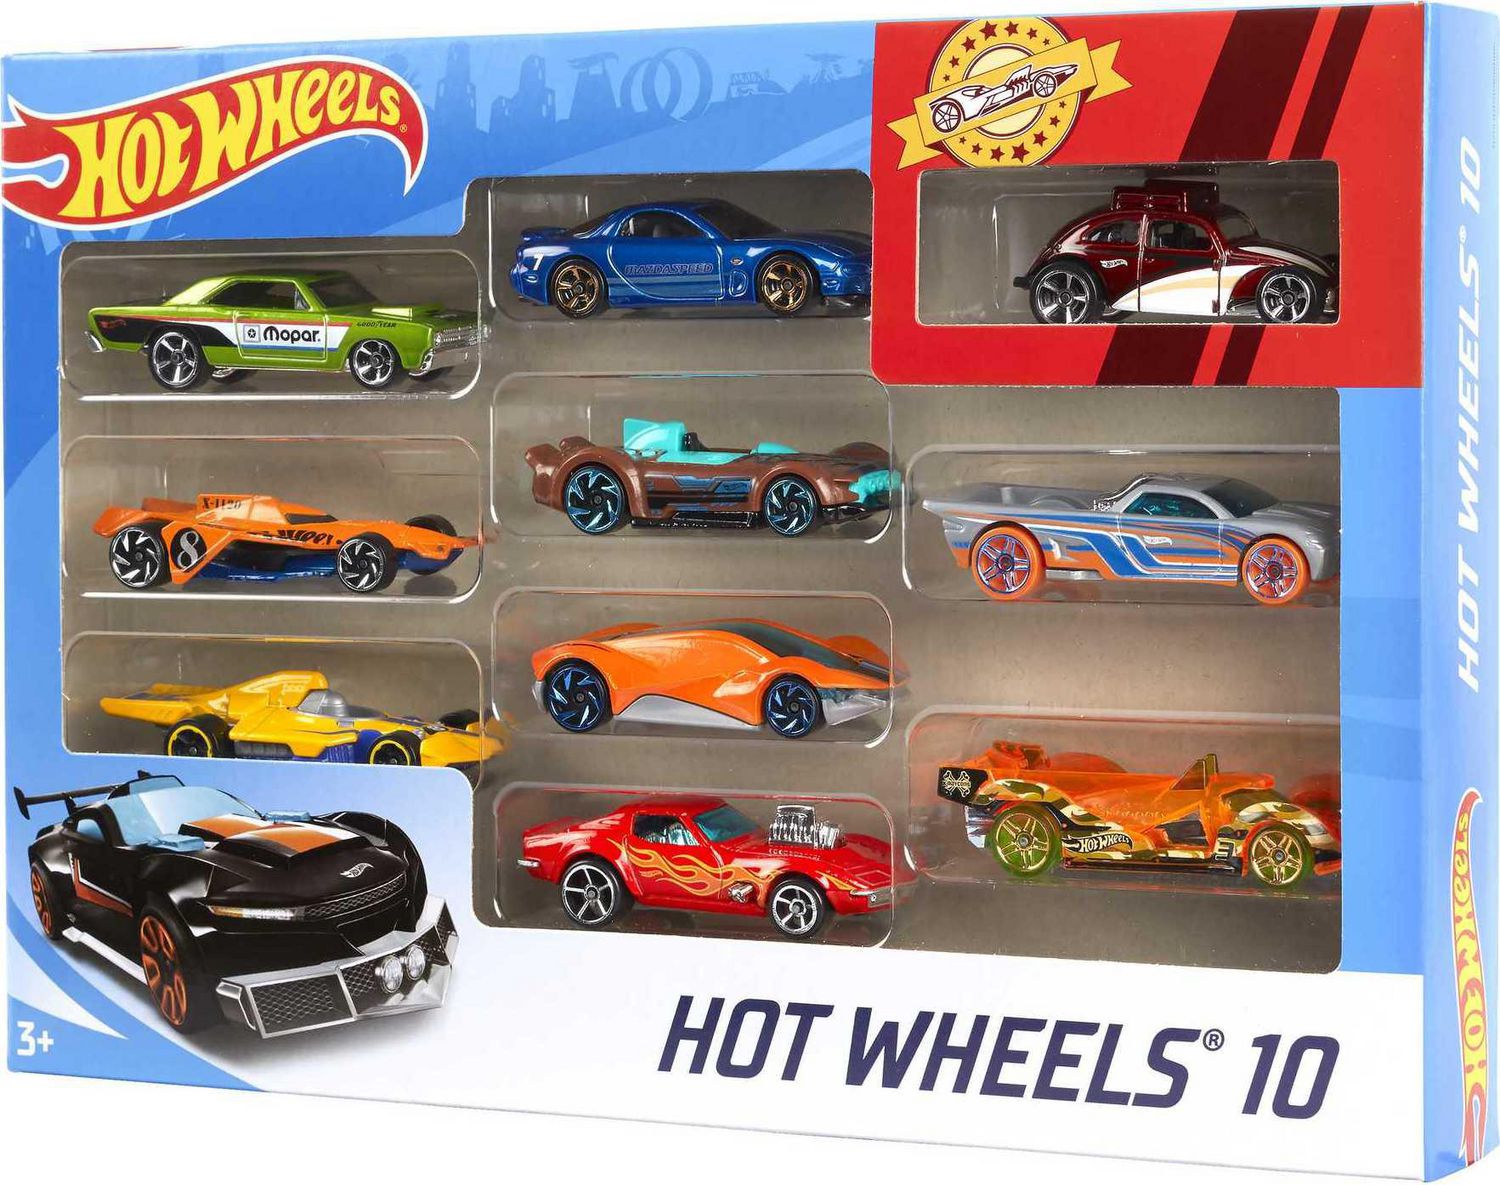 Hot Wheels 1:64 Scale 10-Pack Cars - Styles May Vary, Ages 3+